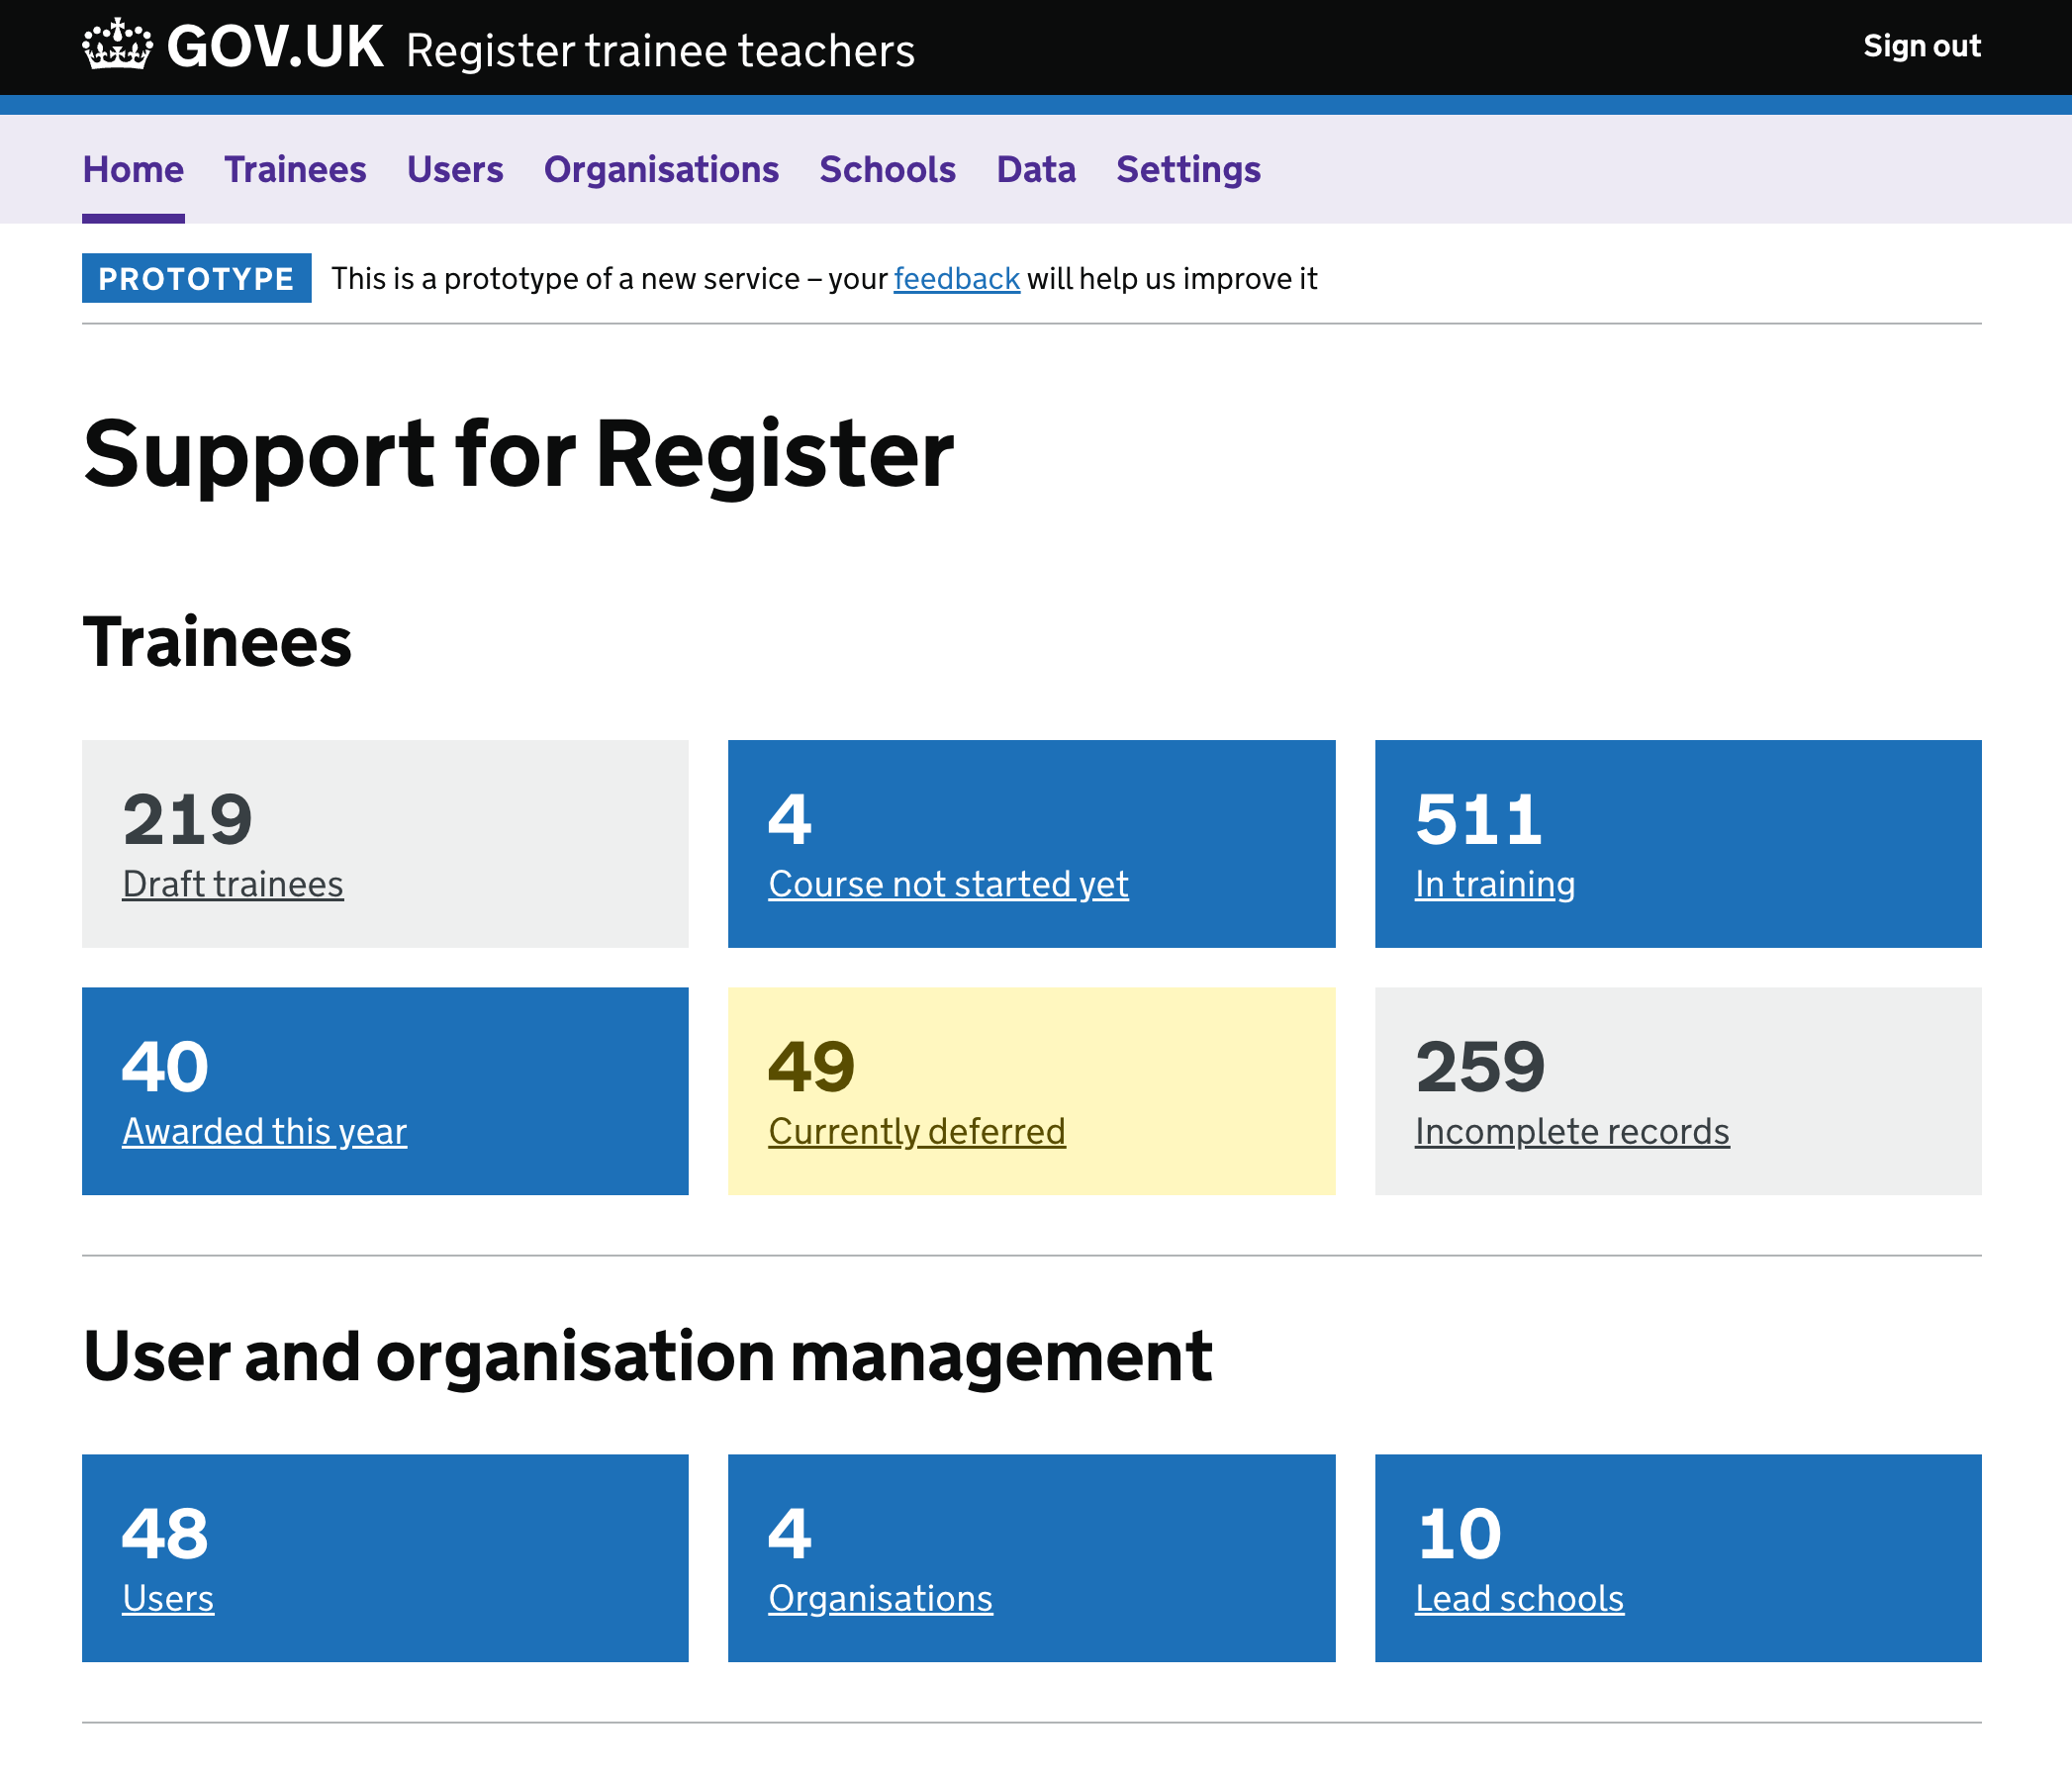 Screenshot of new support home page. There are several tiles on the page each showing a metric and count, such as number of users, or number of trainees.